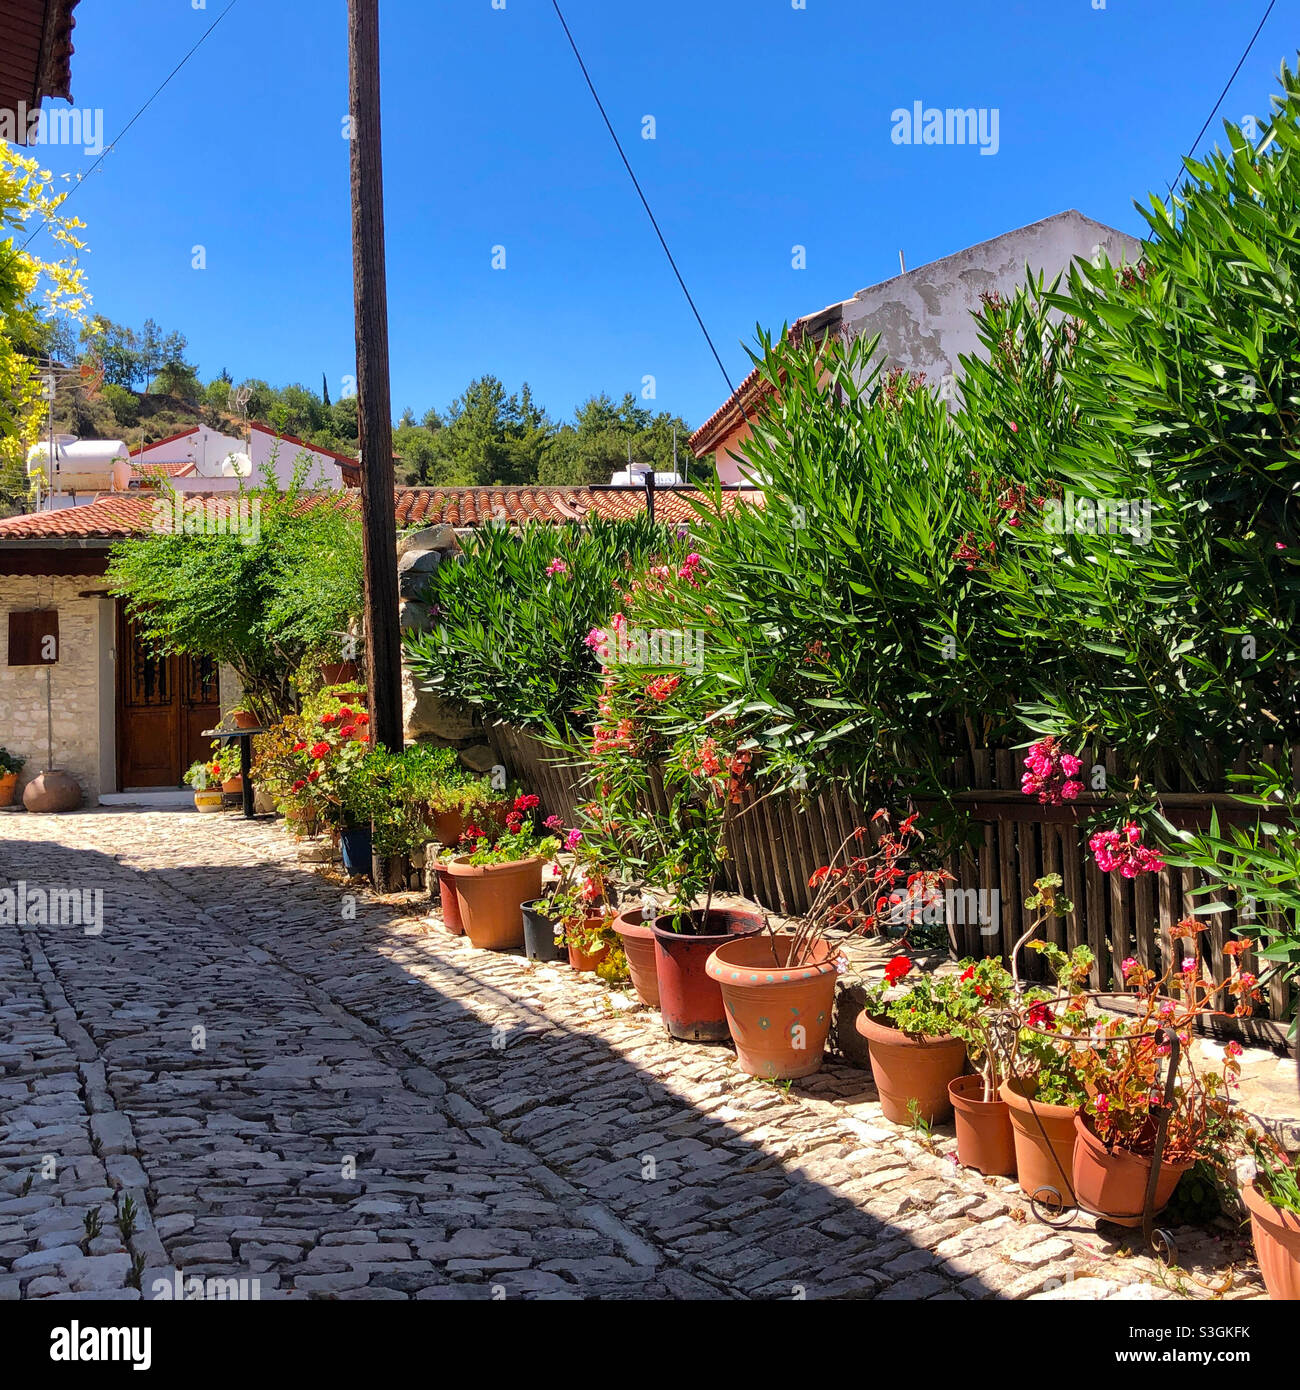 A village street in Lania (Laneia) in the Troodos Mountains in Cyprus, lined with flower pots. Stock Photo